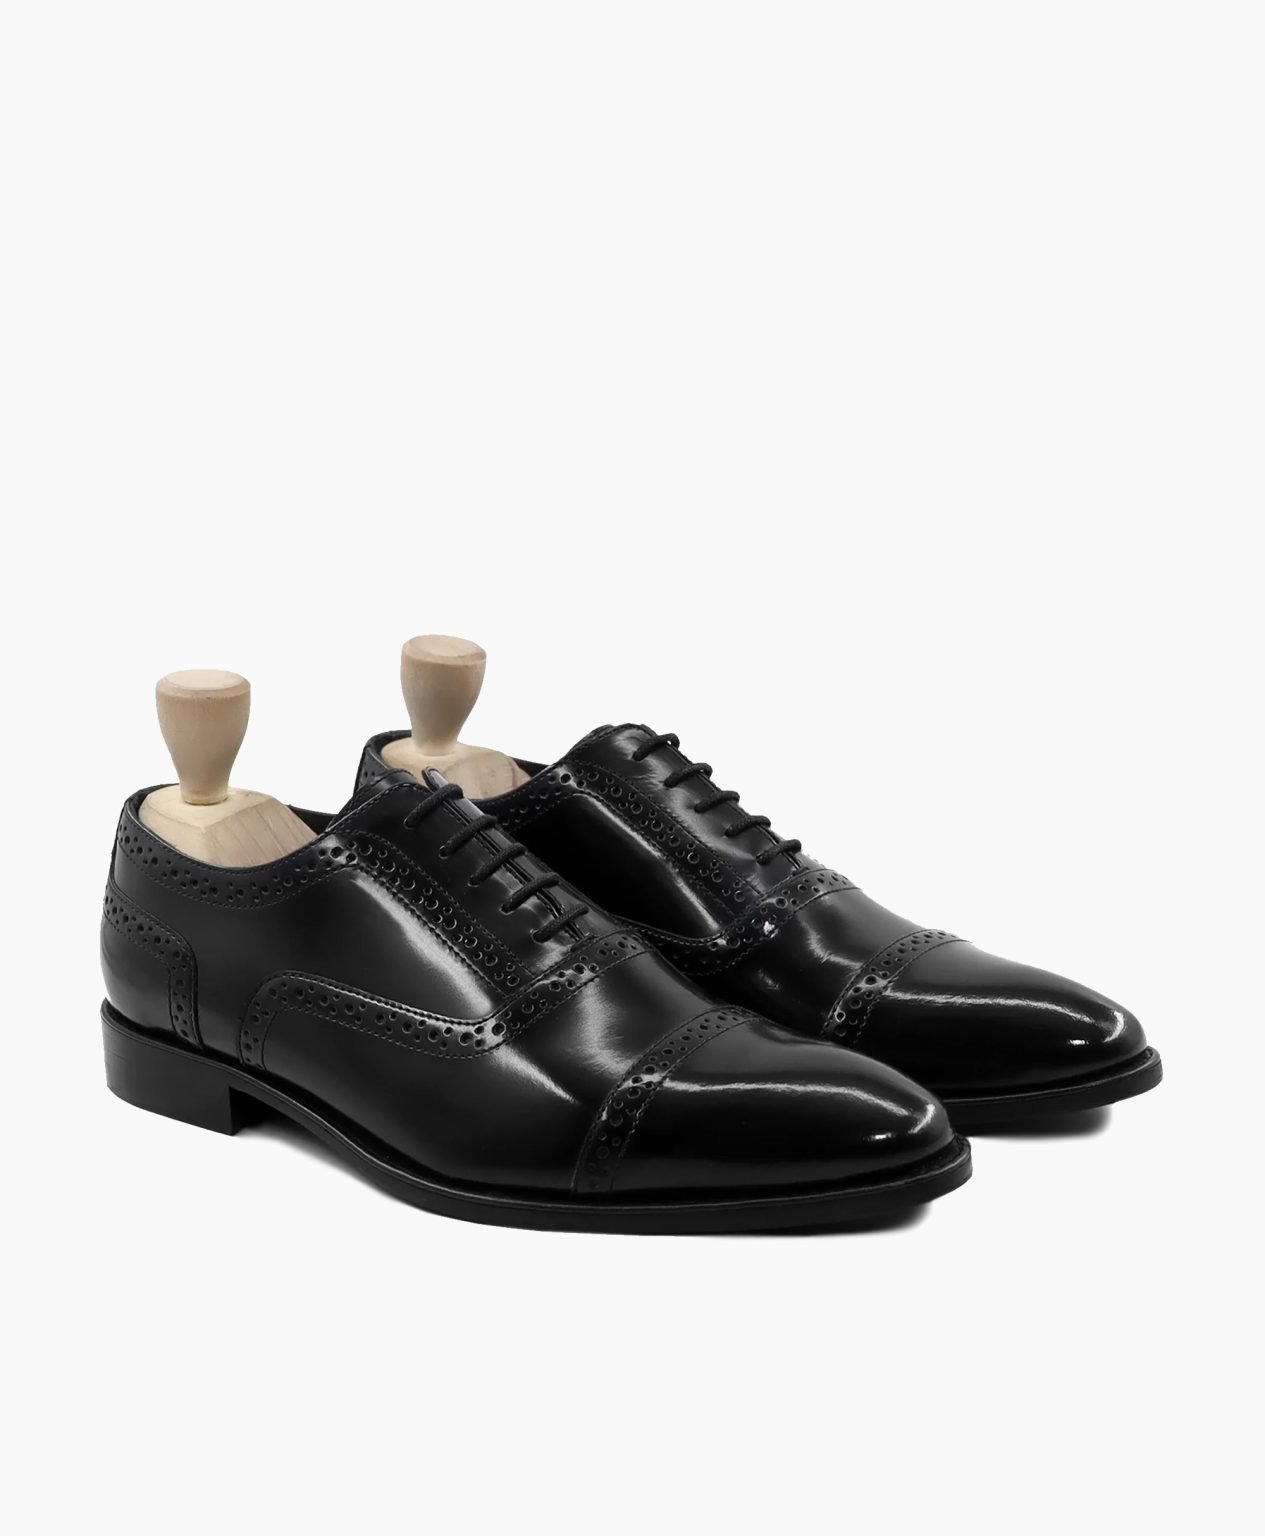 ramsey-oxford-black-box-high-shine-leather-shoes-image200